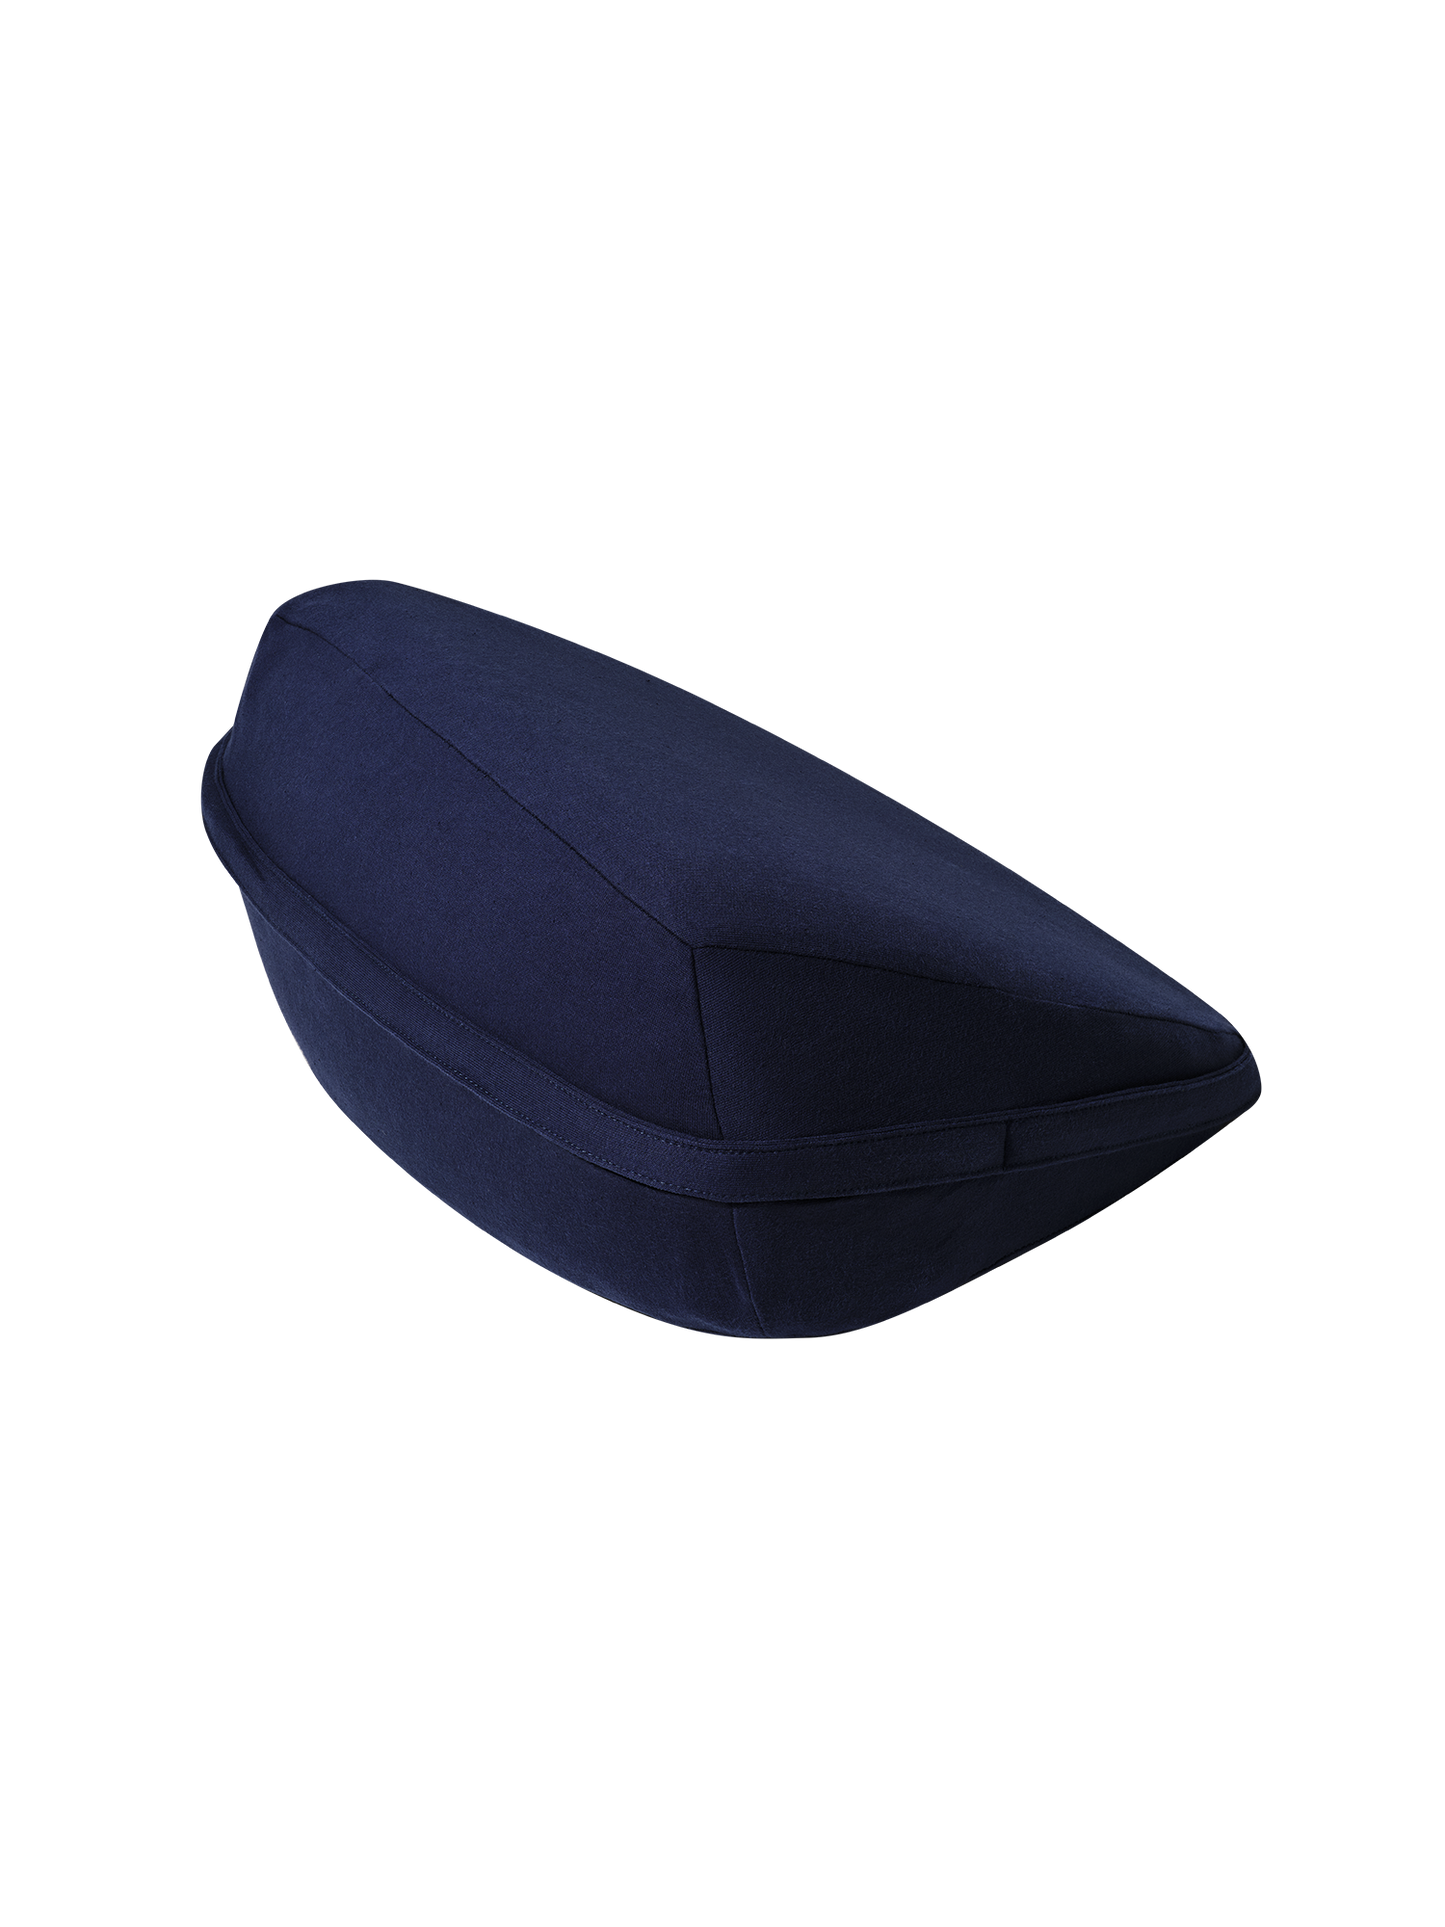 Indigo | Seamless | An indigo-blue pillow, roughly square pyramid shaped, from the back on beige background.